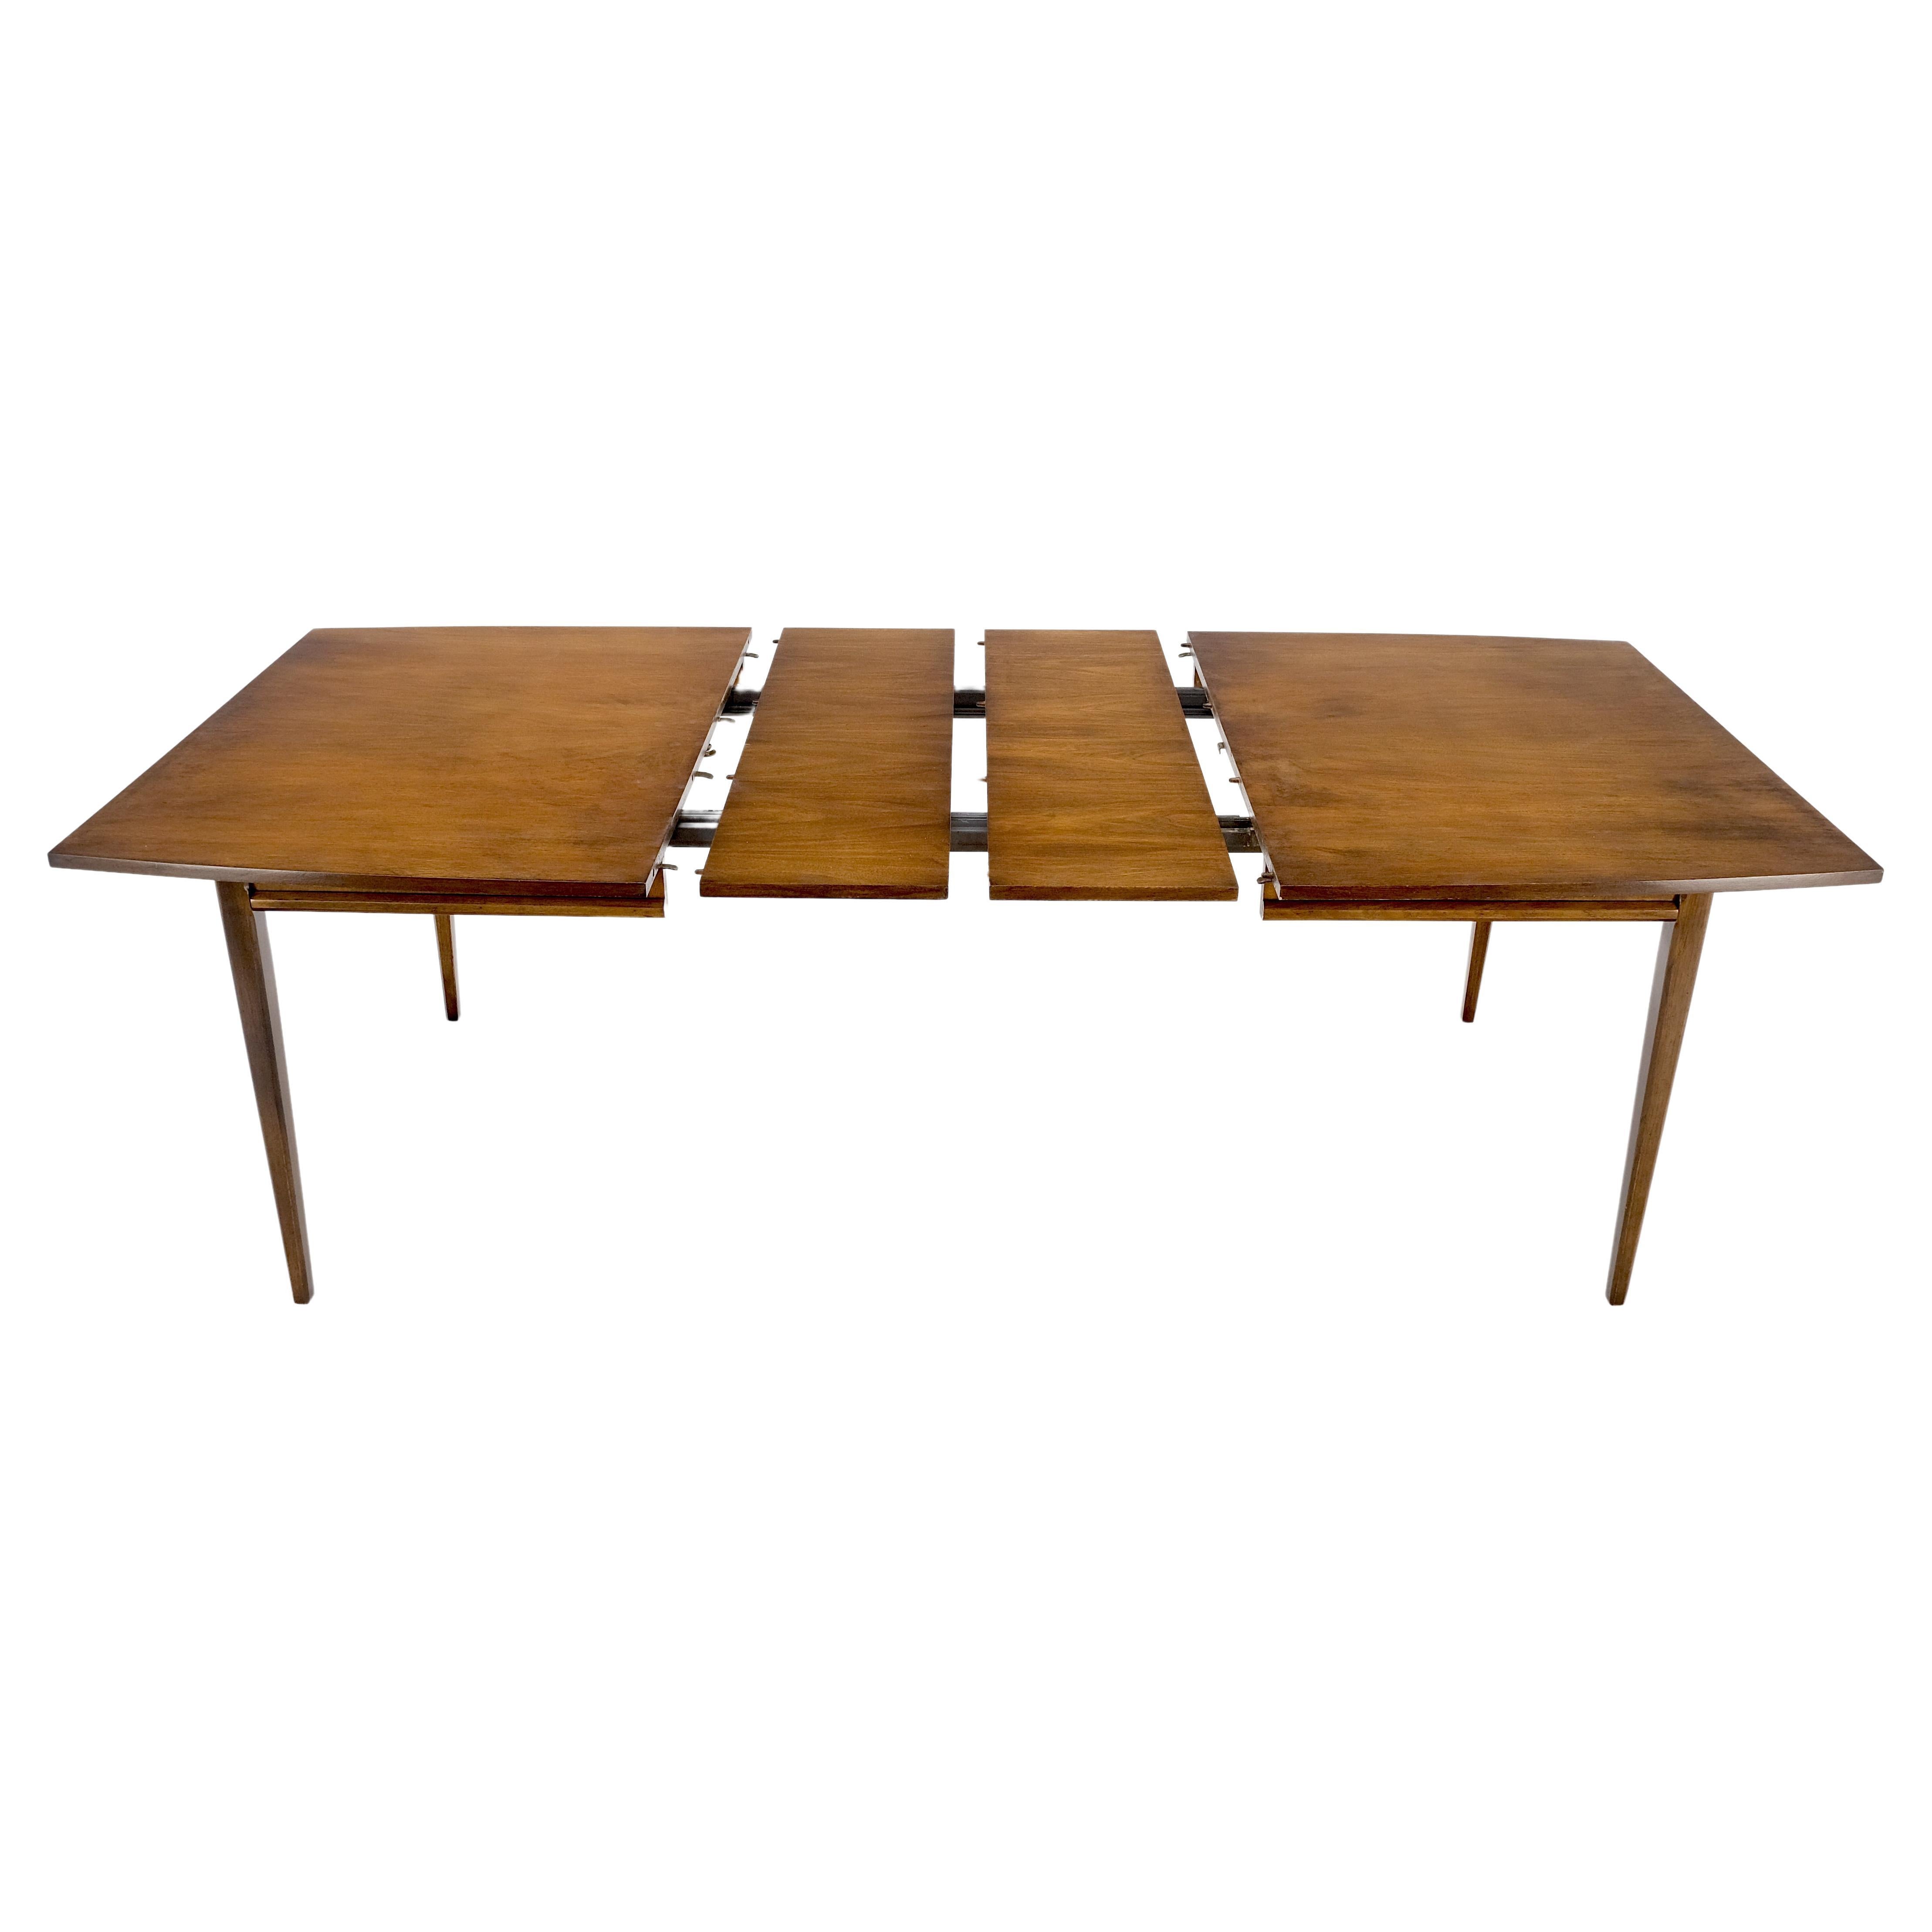 American Walnut Danish Mid Century Modern Style Dining Table 2 Extension Boards  For Sale